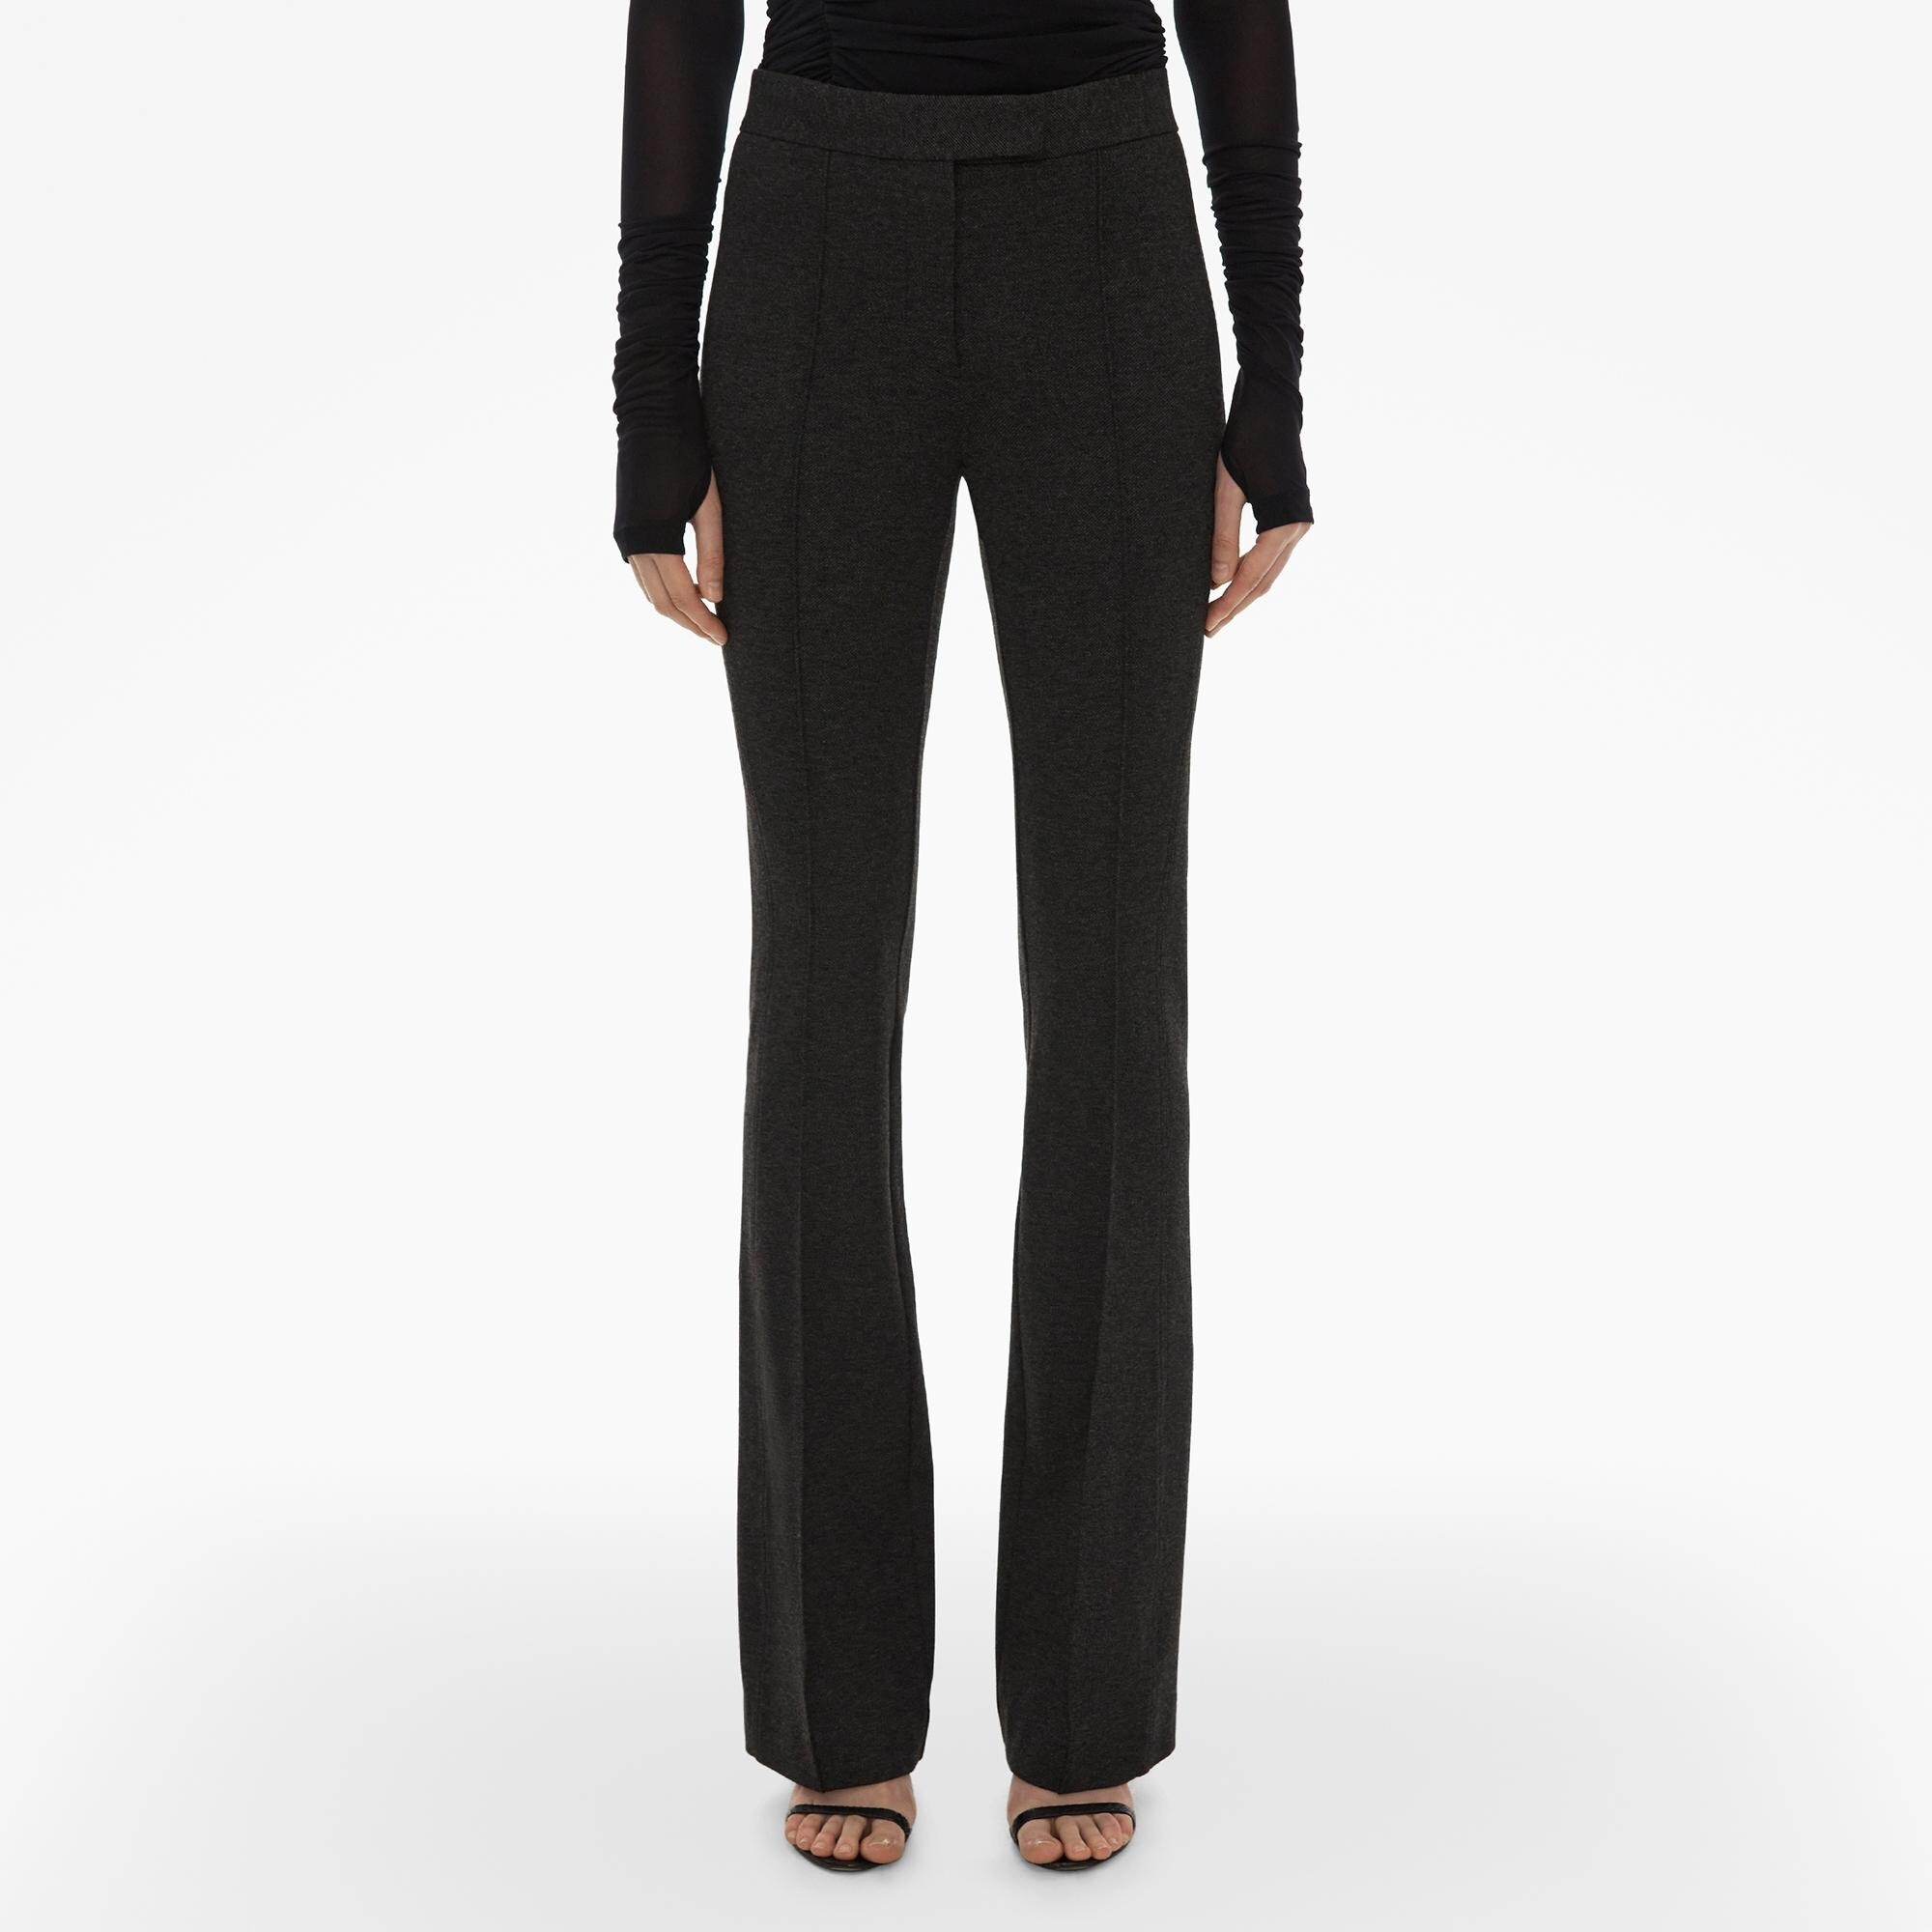 SEAMED BOOTCUT PANT - 3